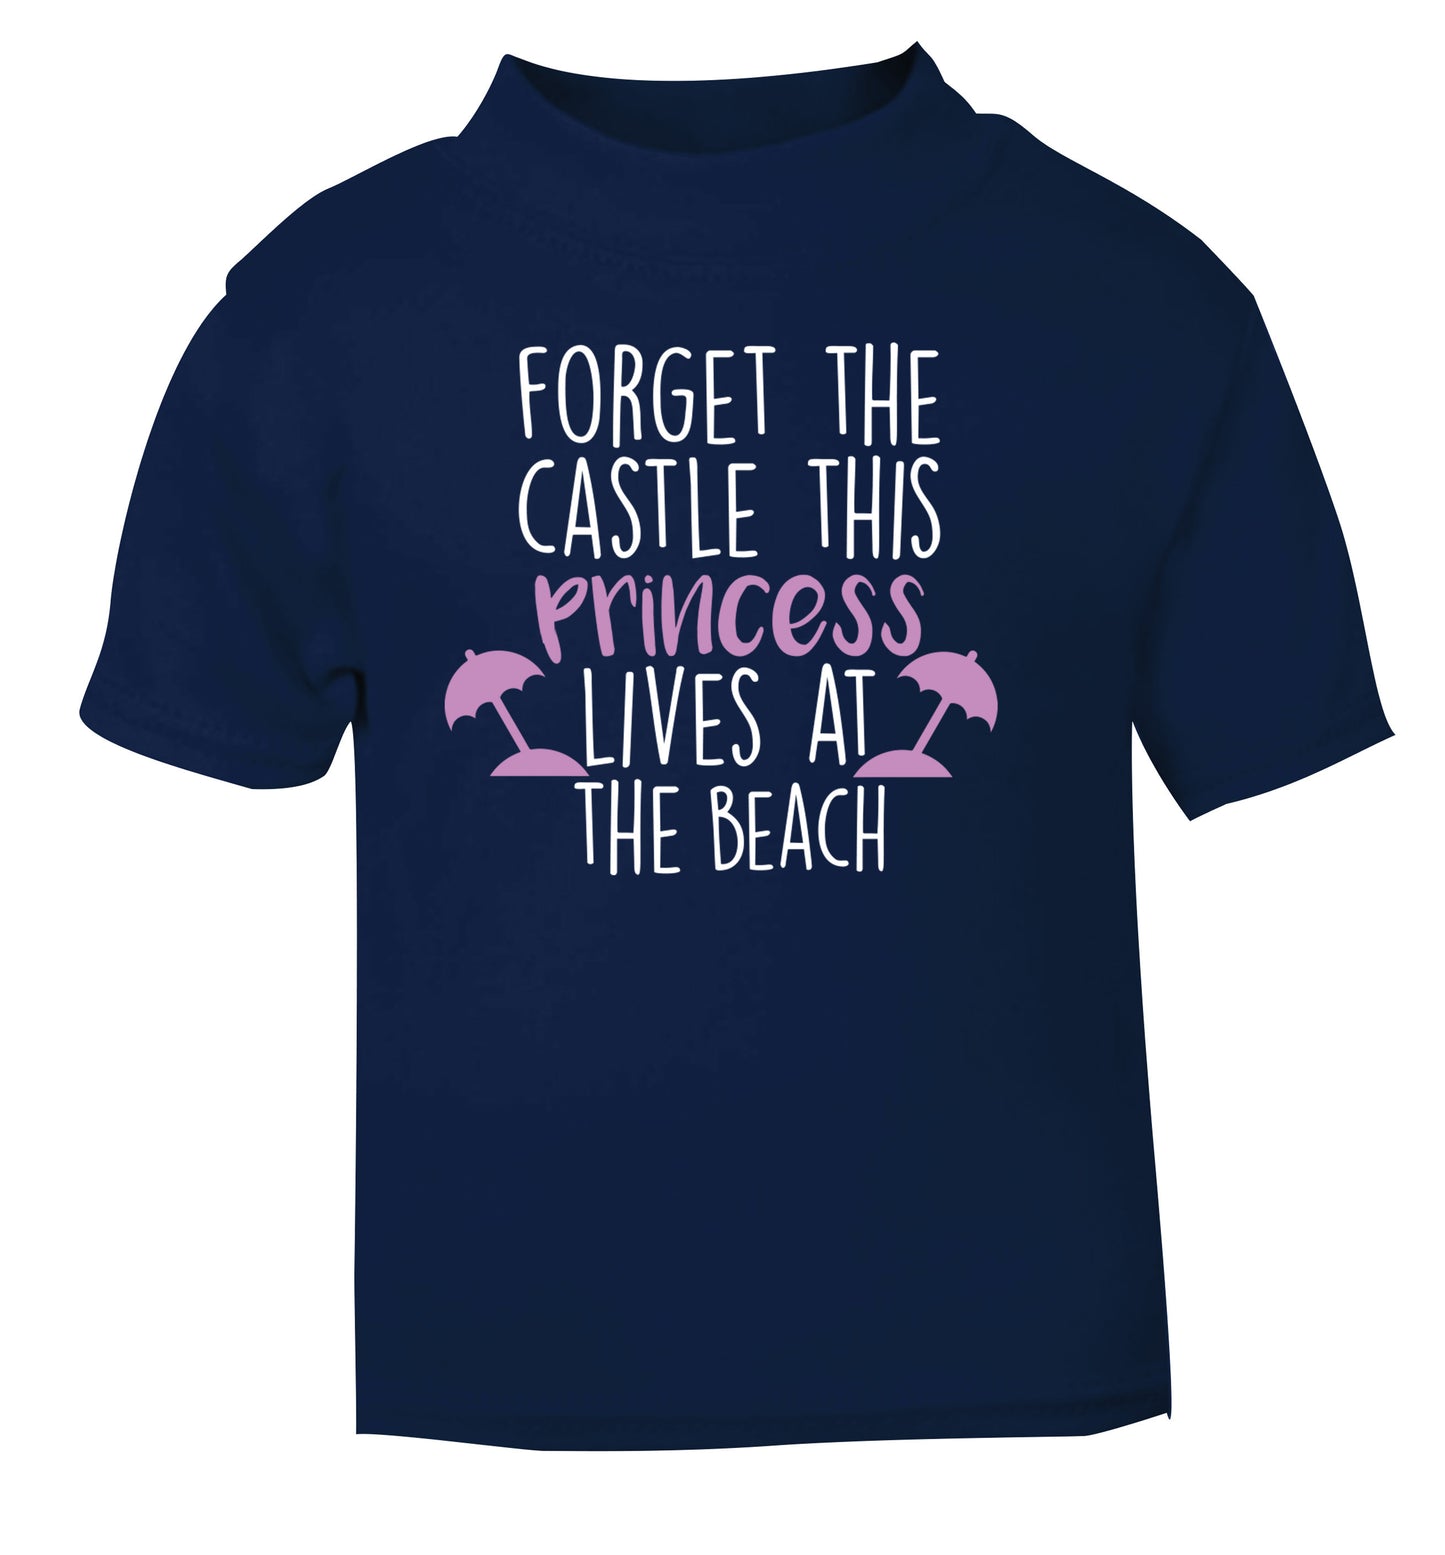 Forget the castle this princess lives at the beach navy Baby Toddler Tshirt 2 Years